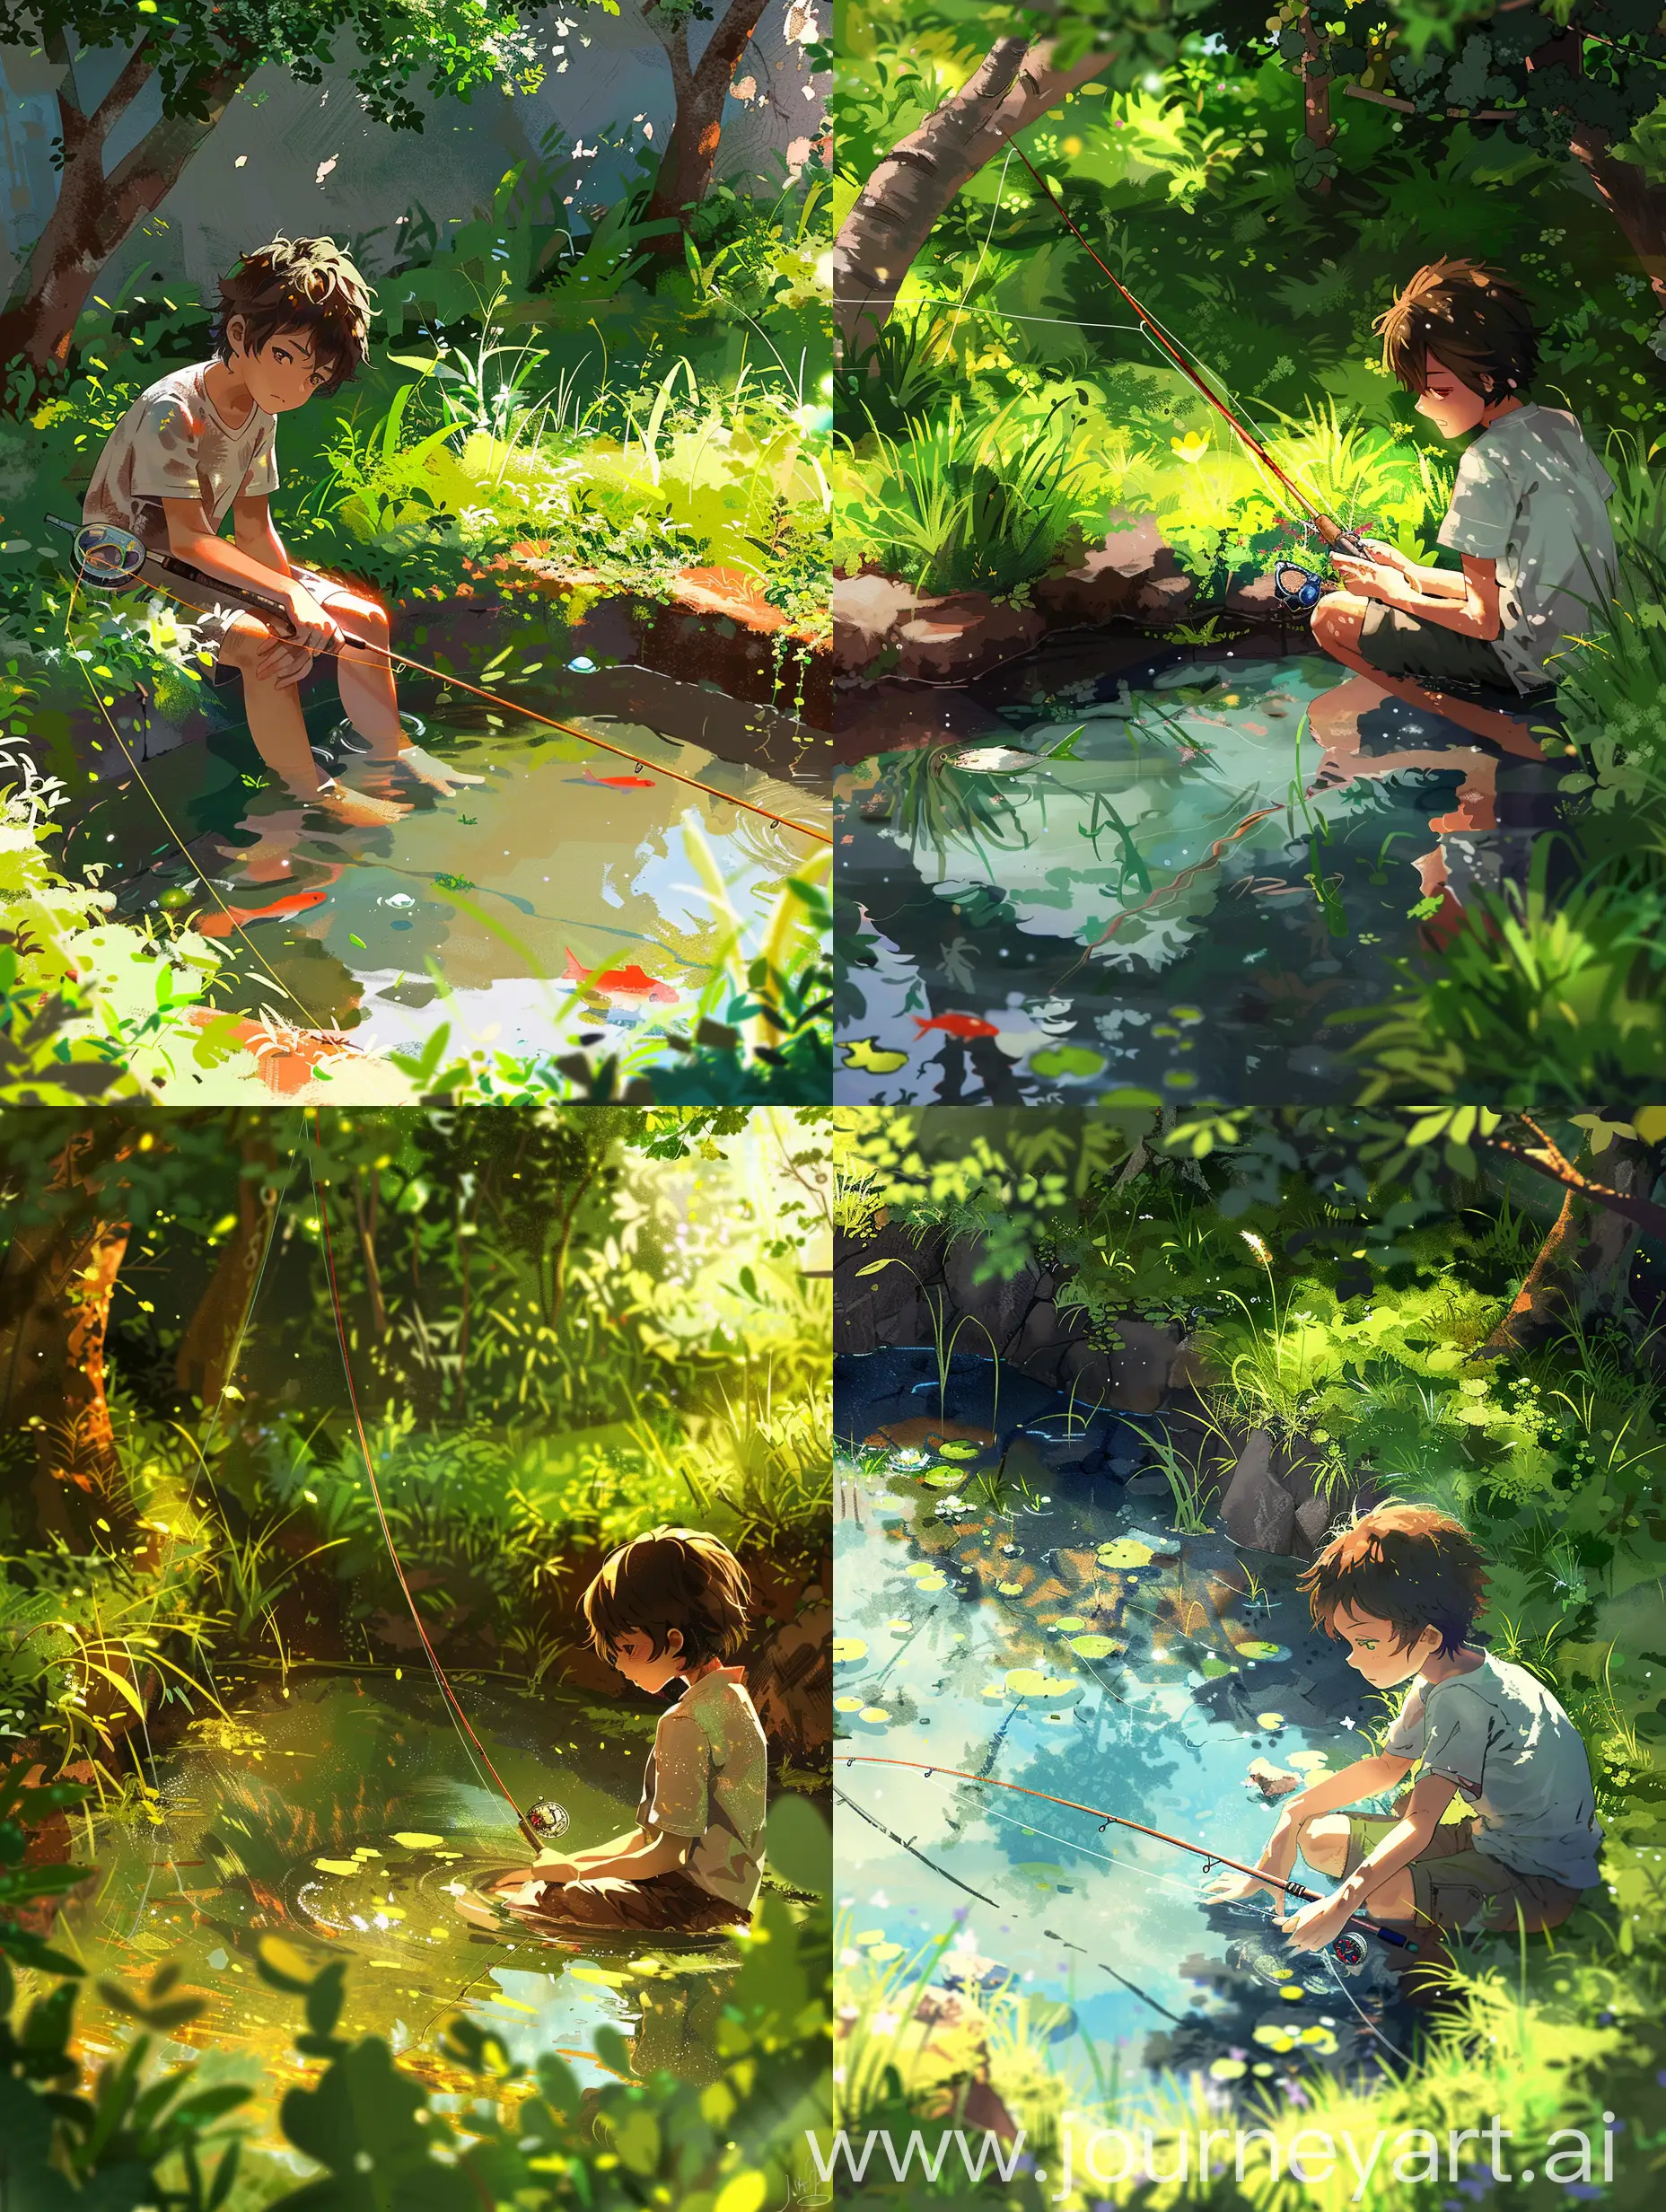 Youthful-Fisherman-Serene-Summertime-by-a-Picturesque-Pond